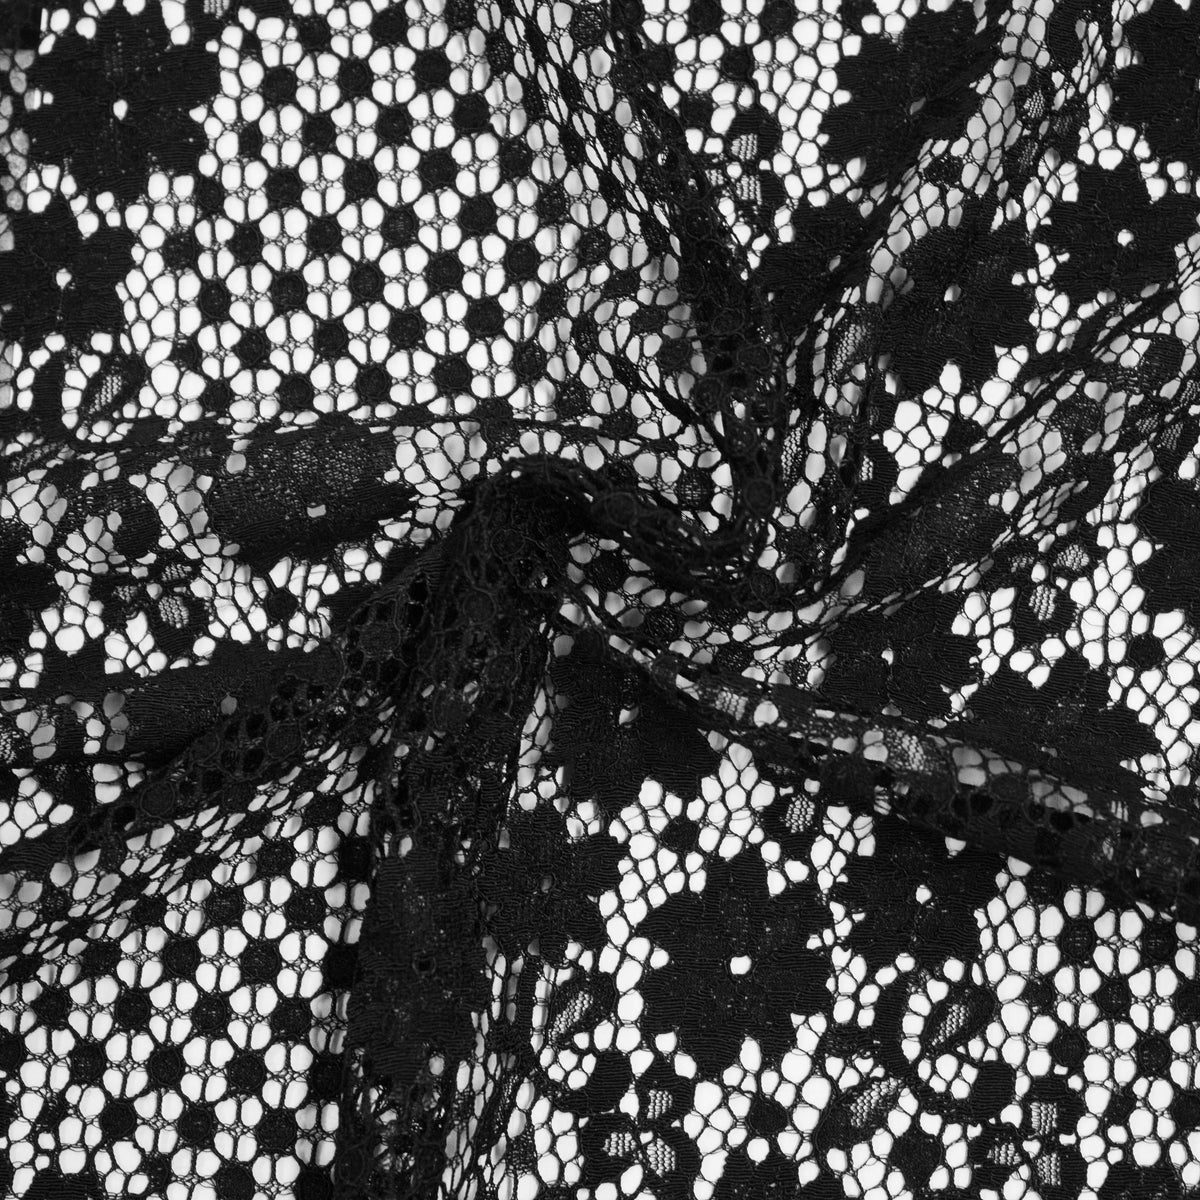 Floral Guipure Lace - Black  Black lace fabric, Lace drawing